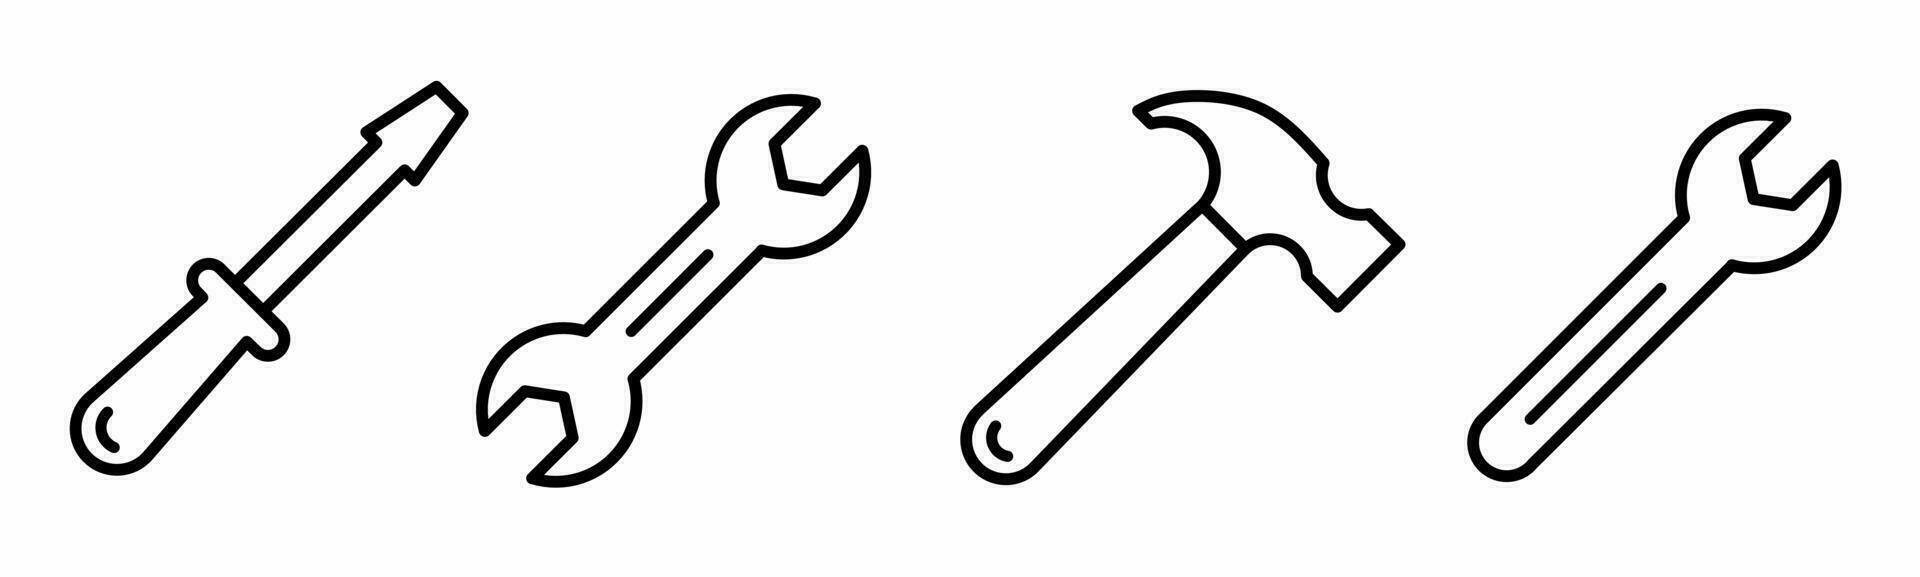 Icon design. Srewdriver, wrench, hammer icon illustration collection. vector